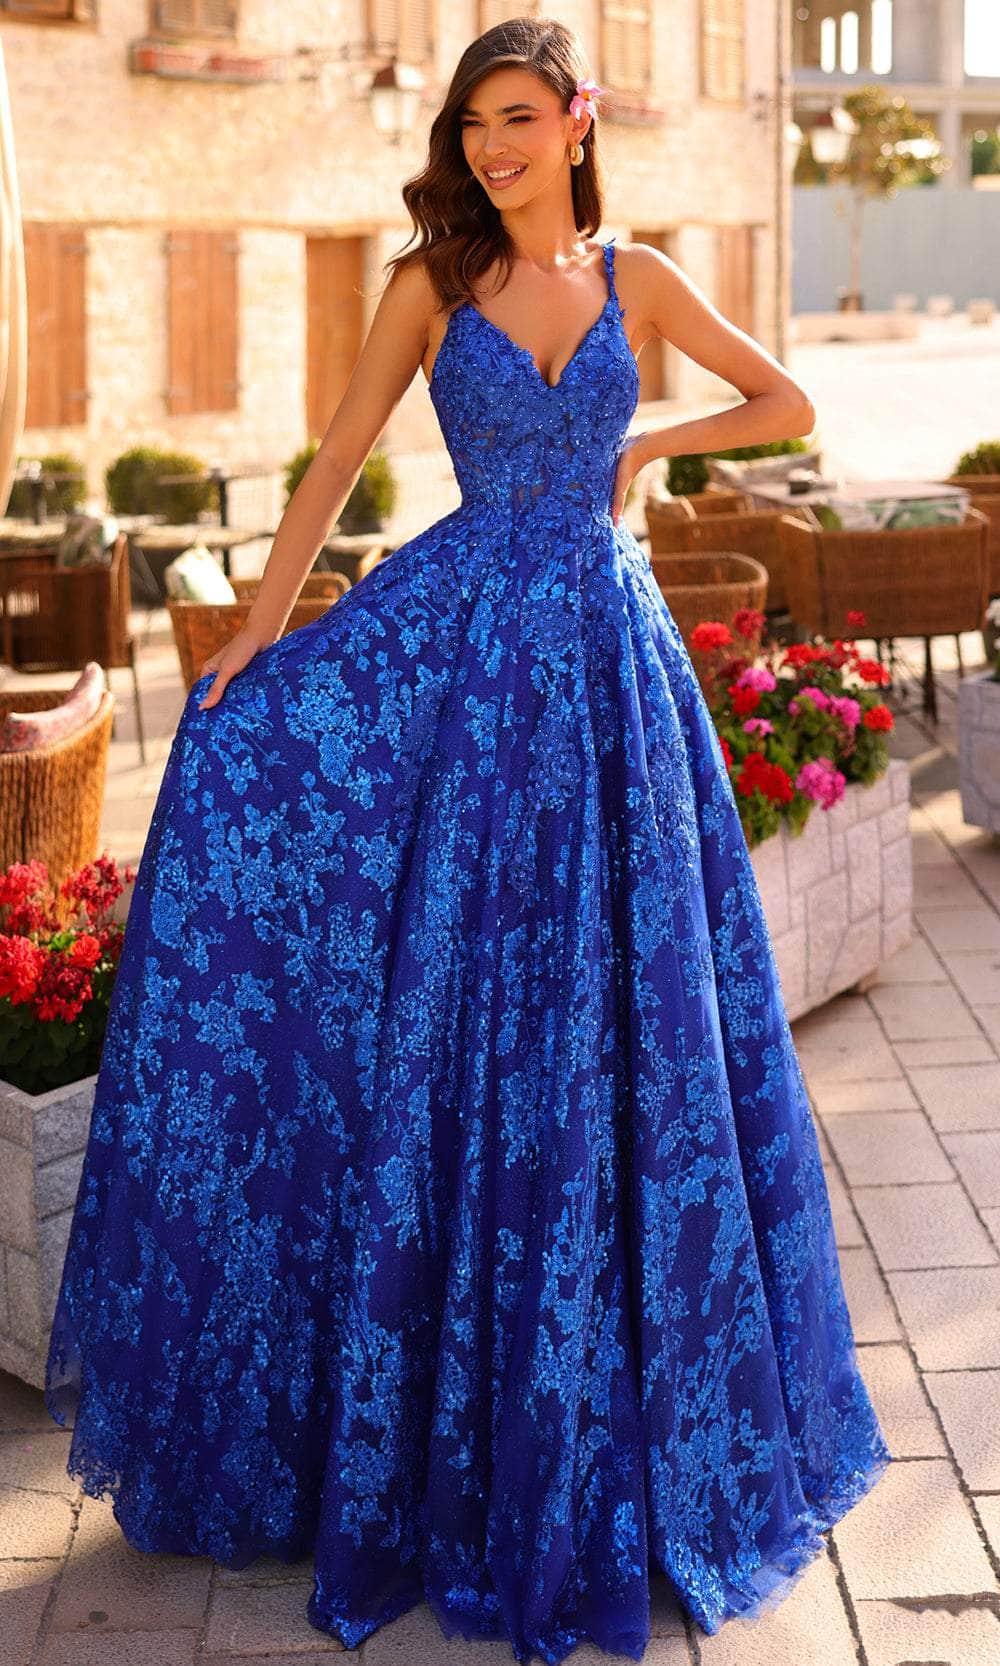 Amarra 88727 - Lace Appliqued Sleeveless Prom Gown
